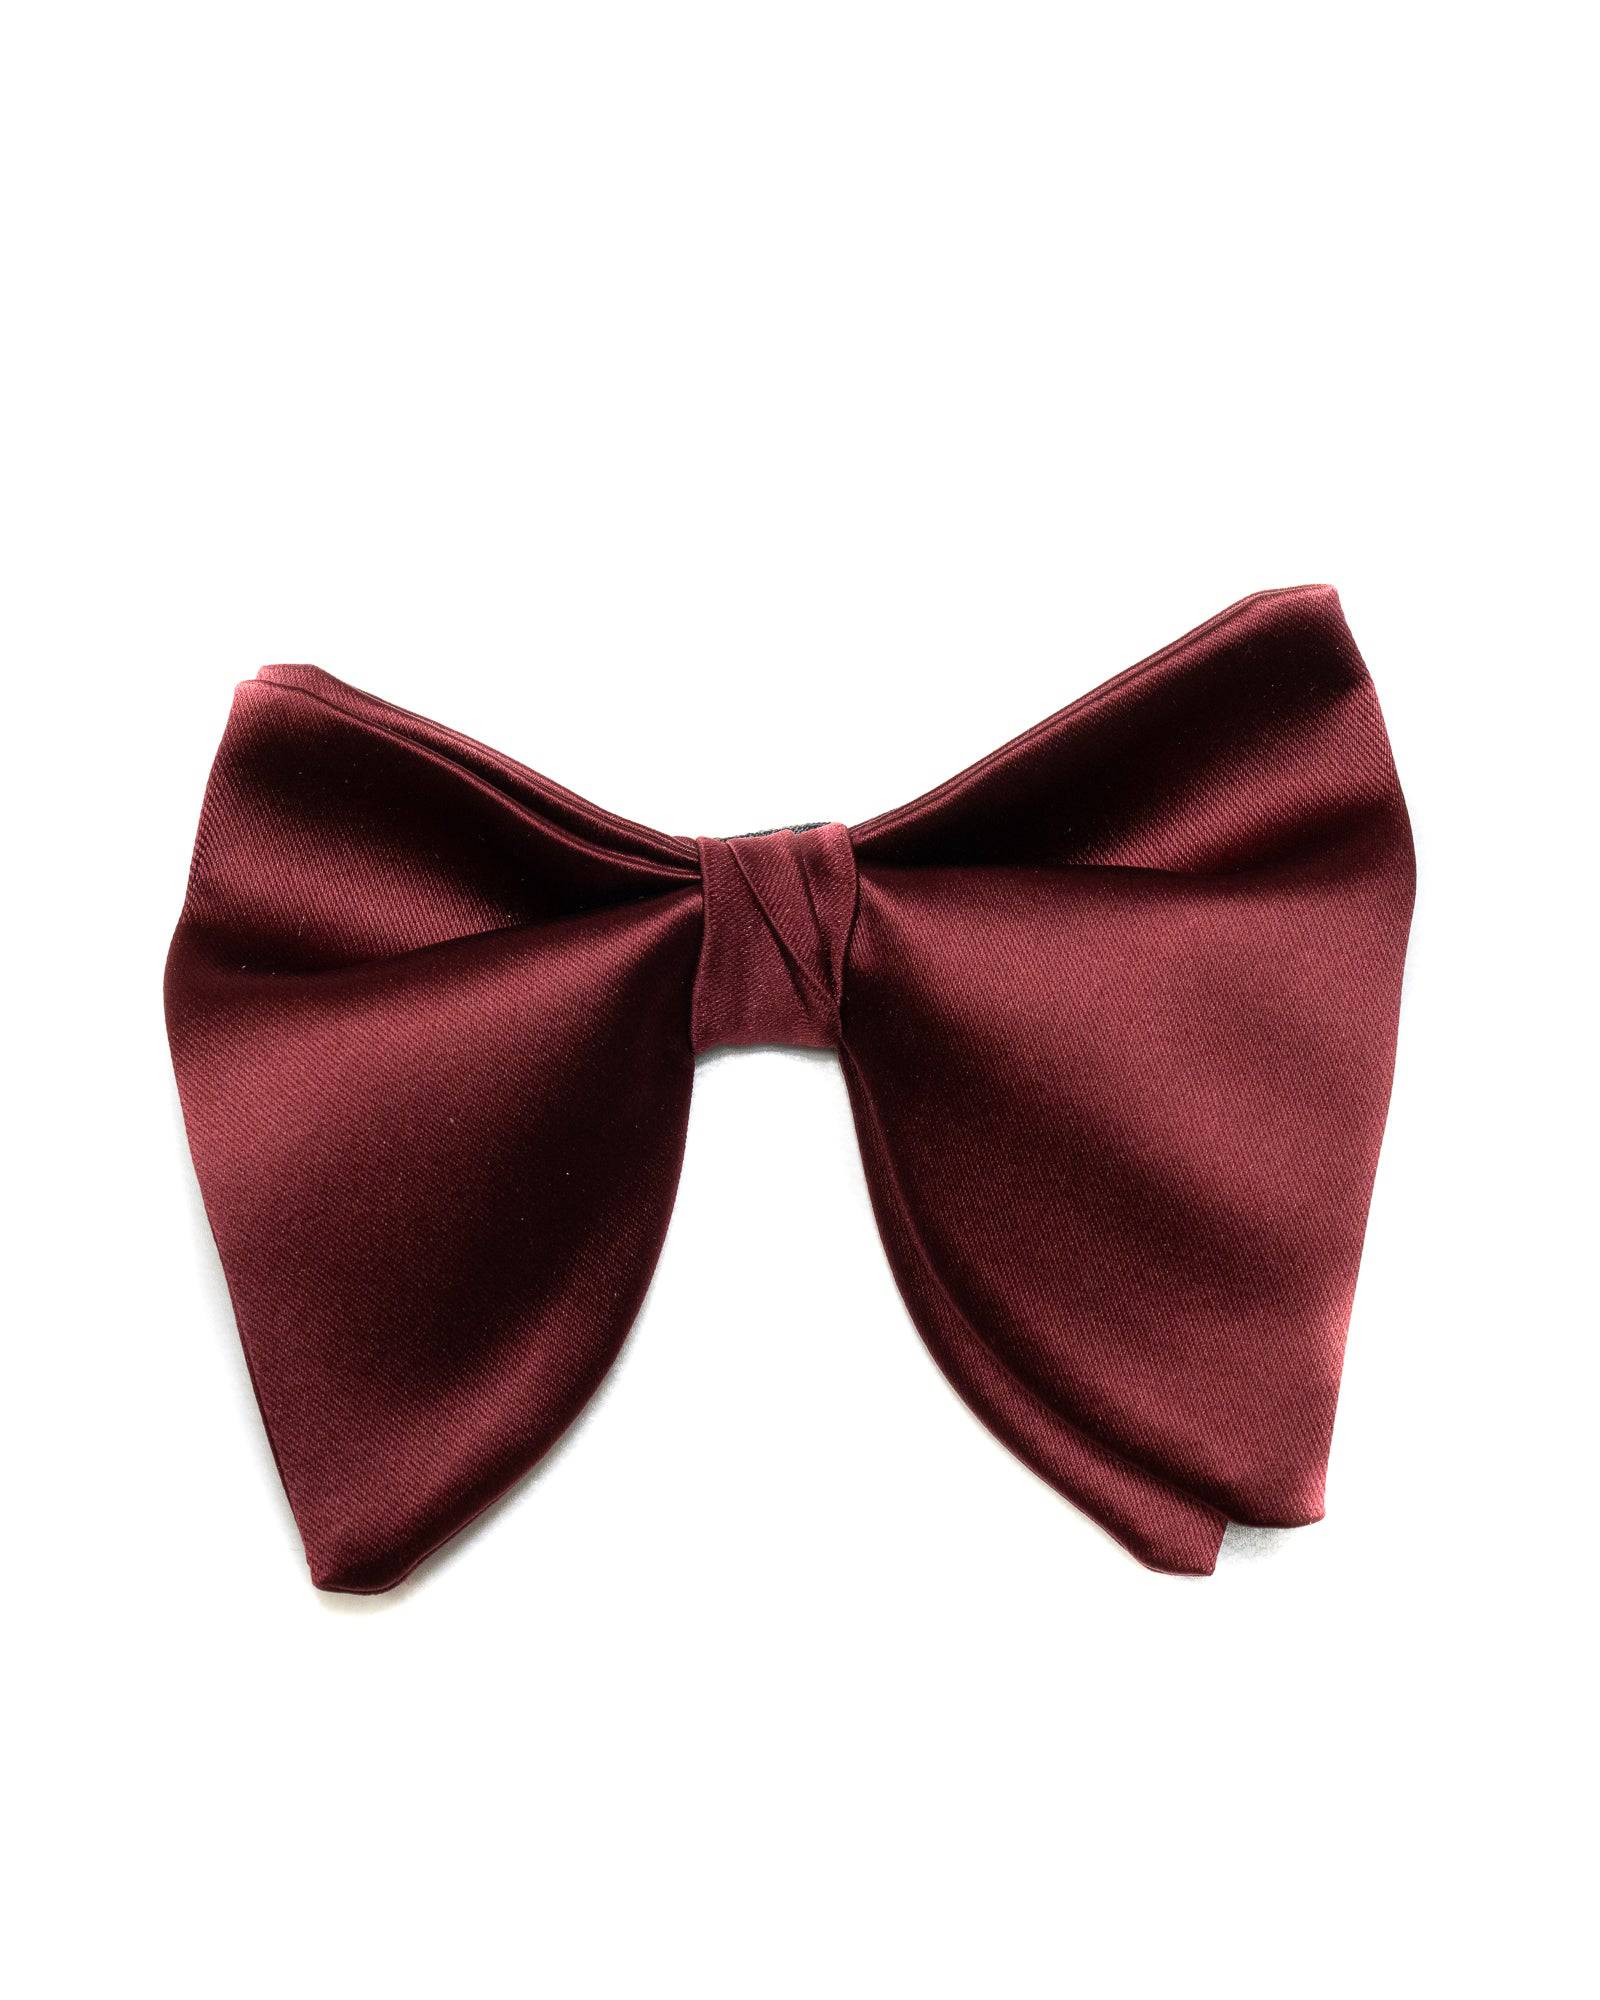 Bow Tie In Butterfly Shape Solid Satin Burgundy - Rainwater's Men's Clothing and Tuxedo Rental